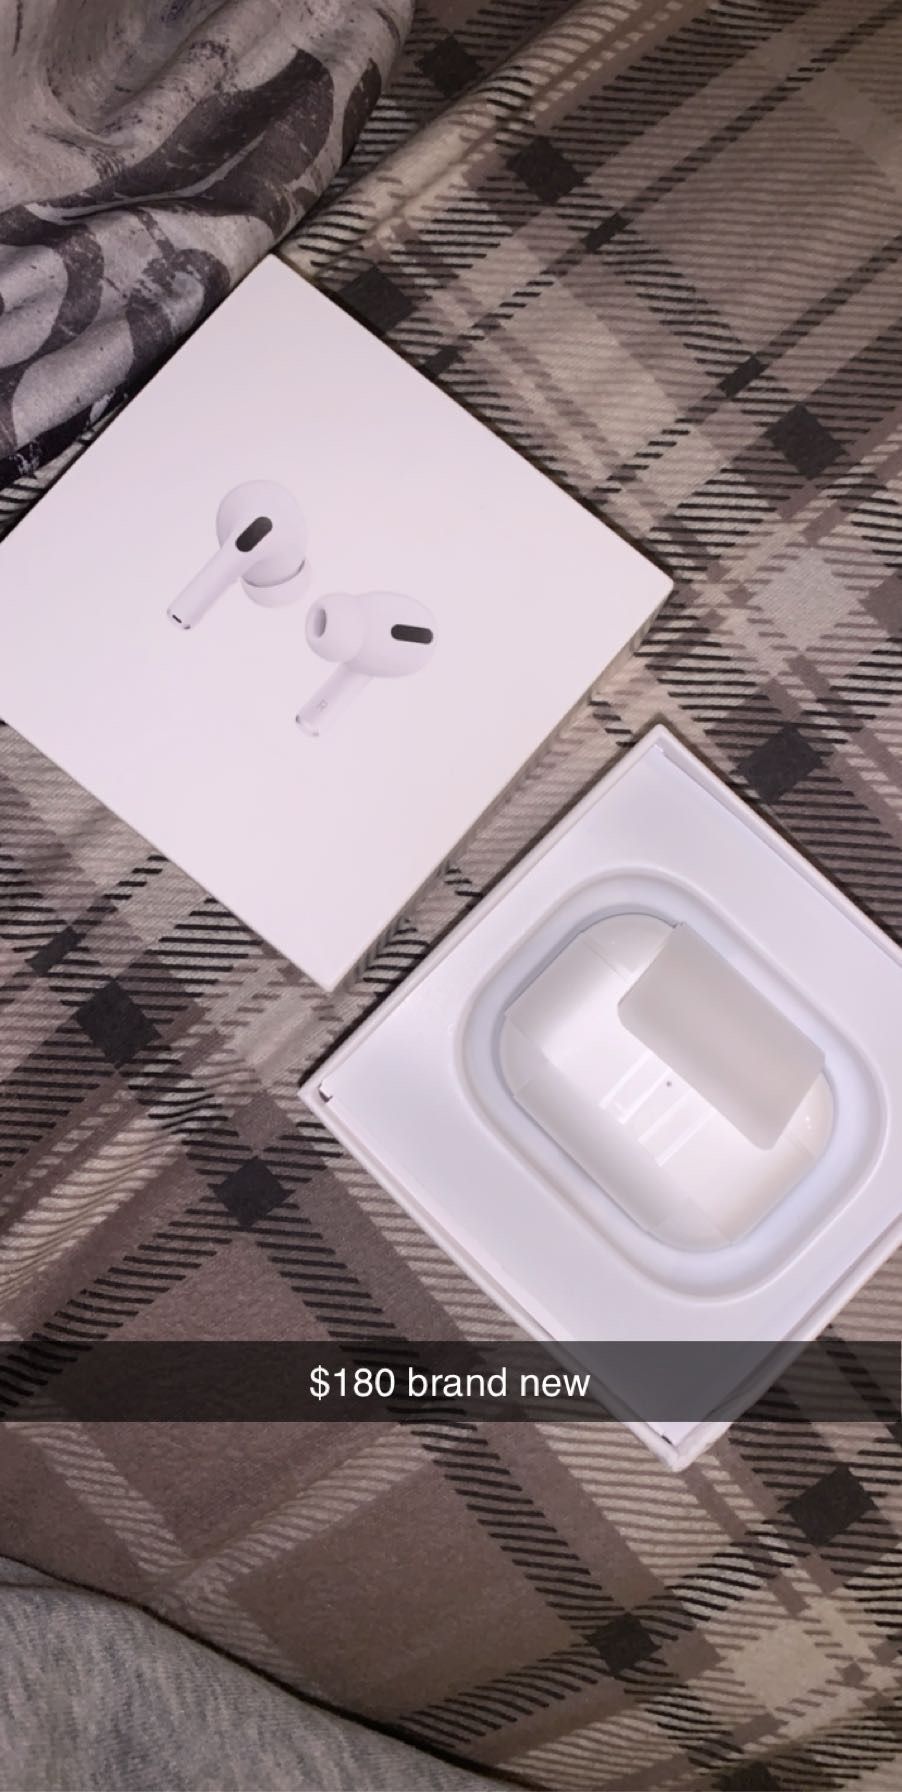 Air pods 𝖯𝗋𝗈 Brand new!!!